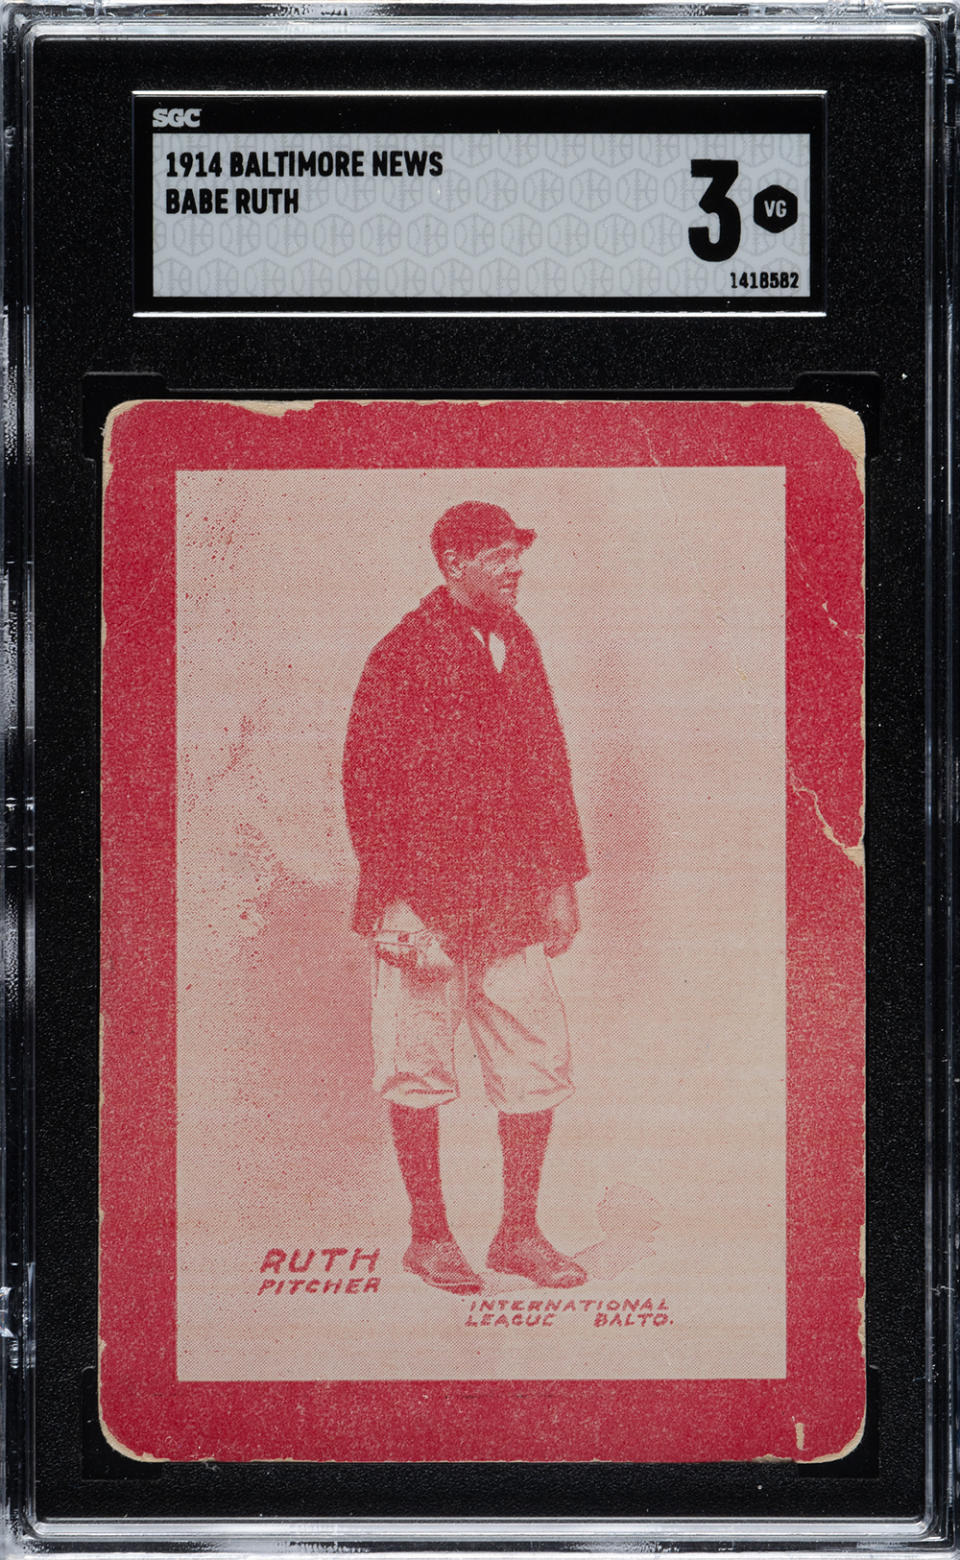 The Babe Ruth rookie card